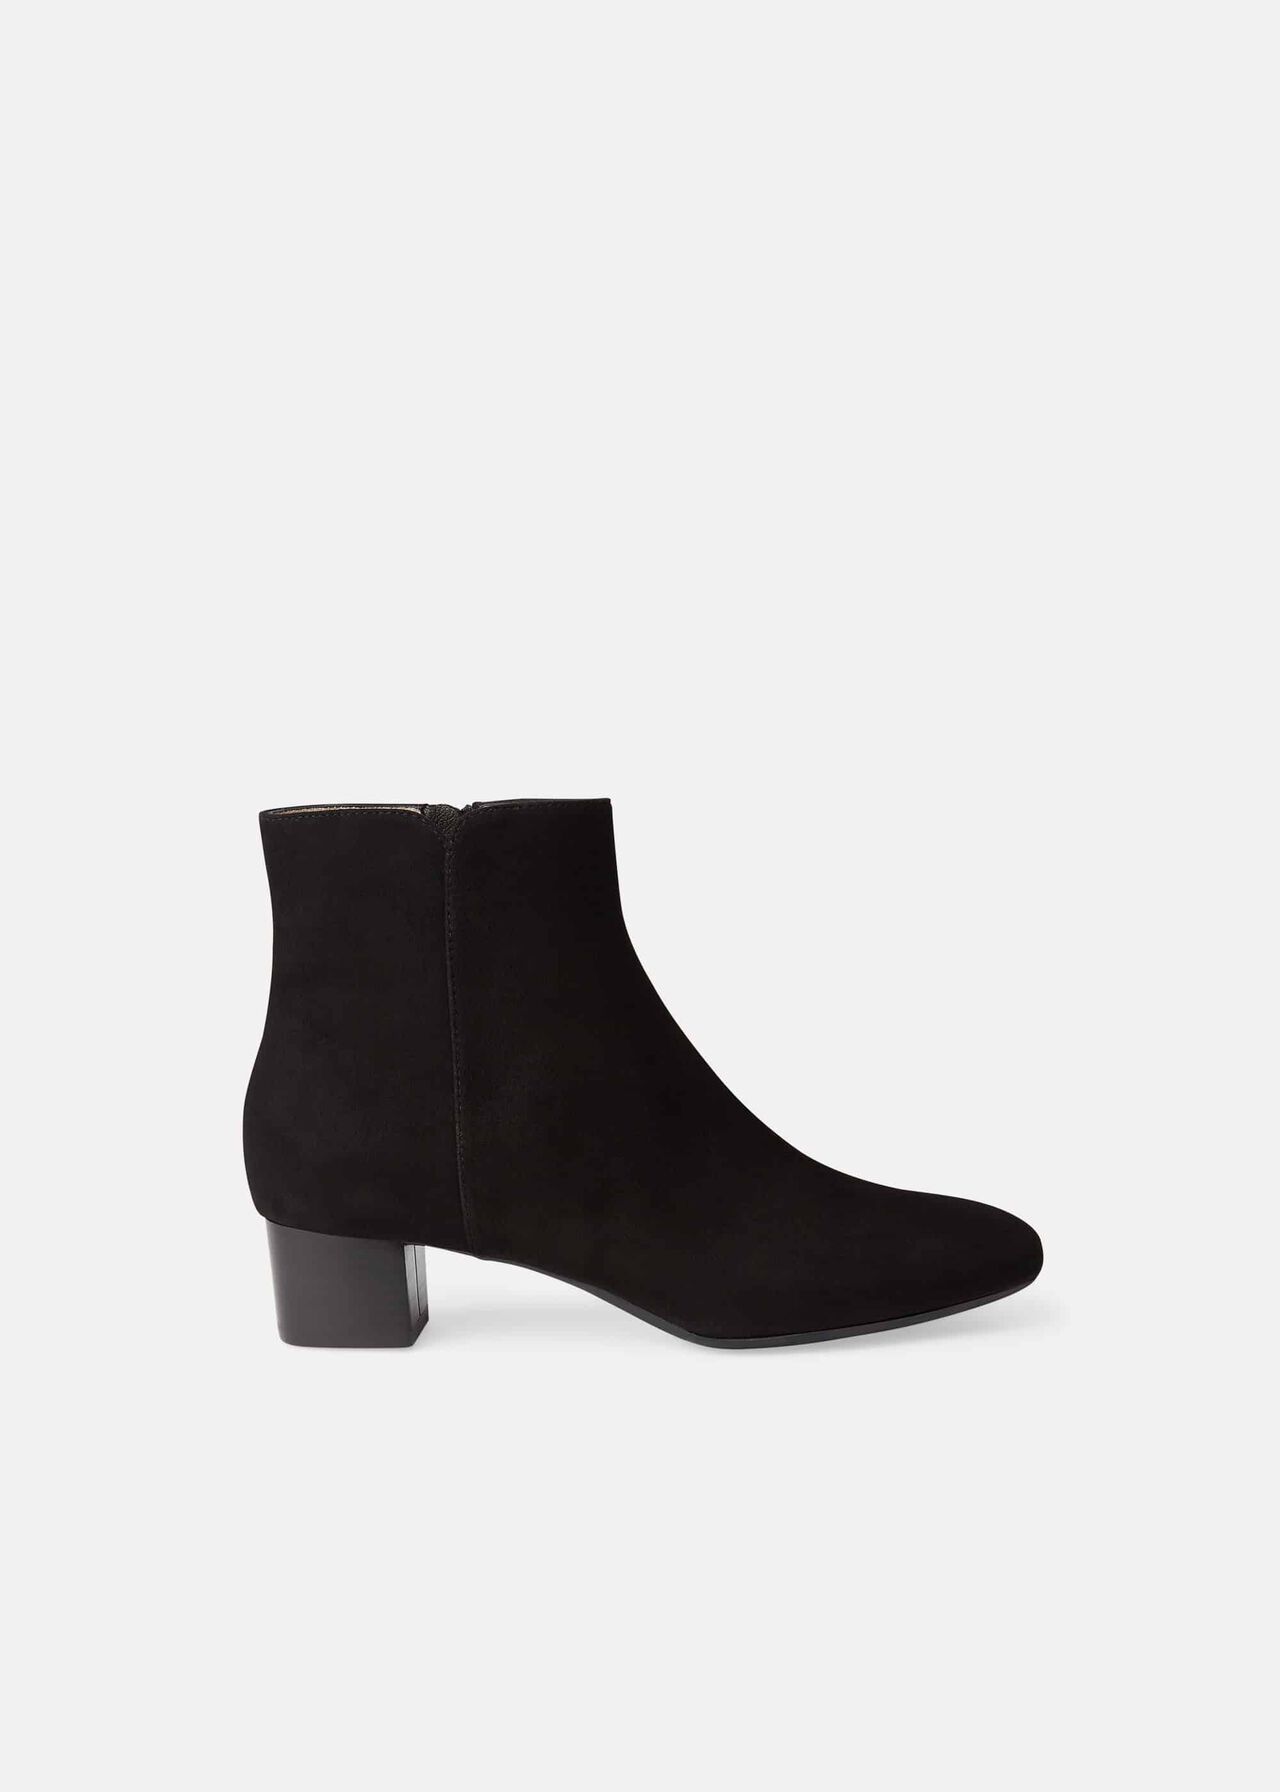 Sadie Ankle Boot | Phase Eight